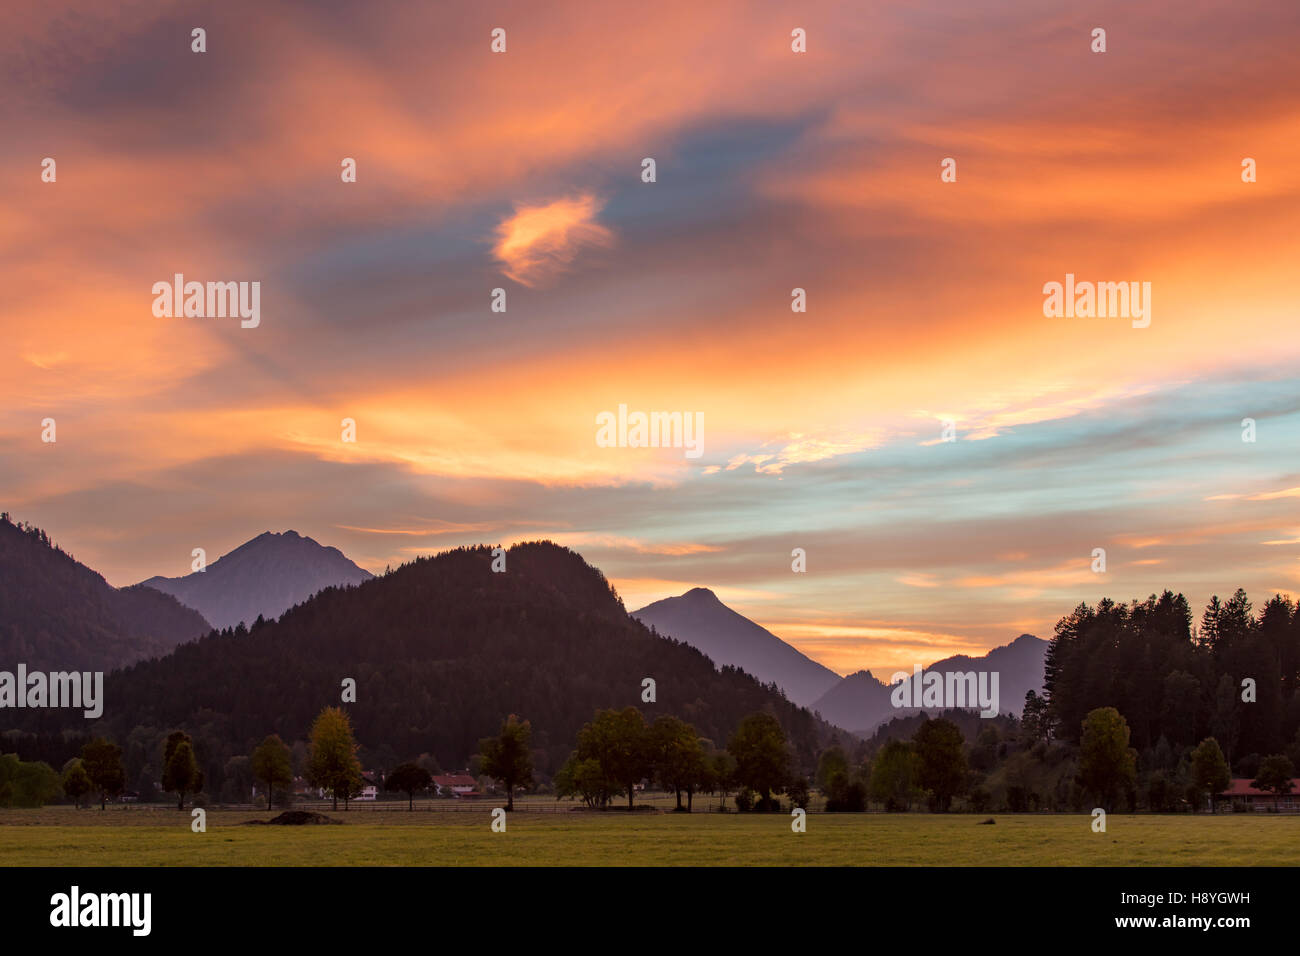 Colorful alto sunset over the foothills of the Bavarian Alps near Fussen, Bavaria, Germany Stock Photo